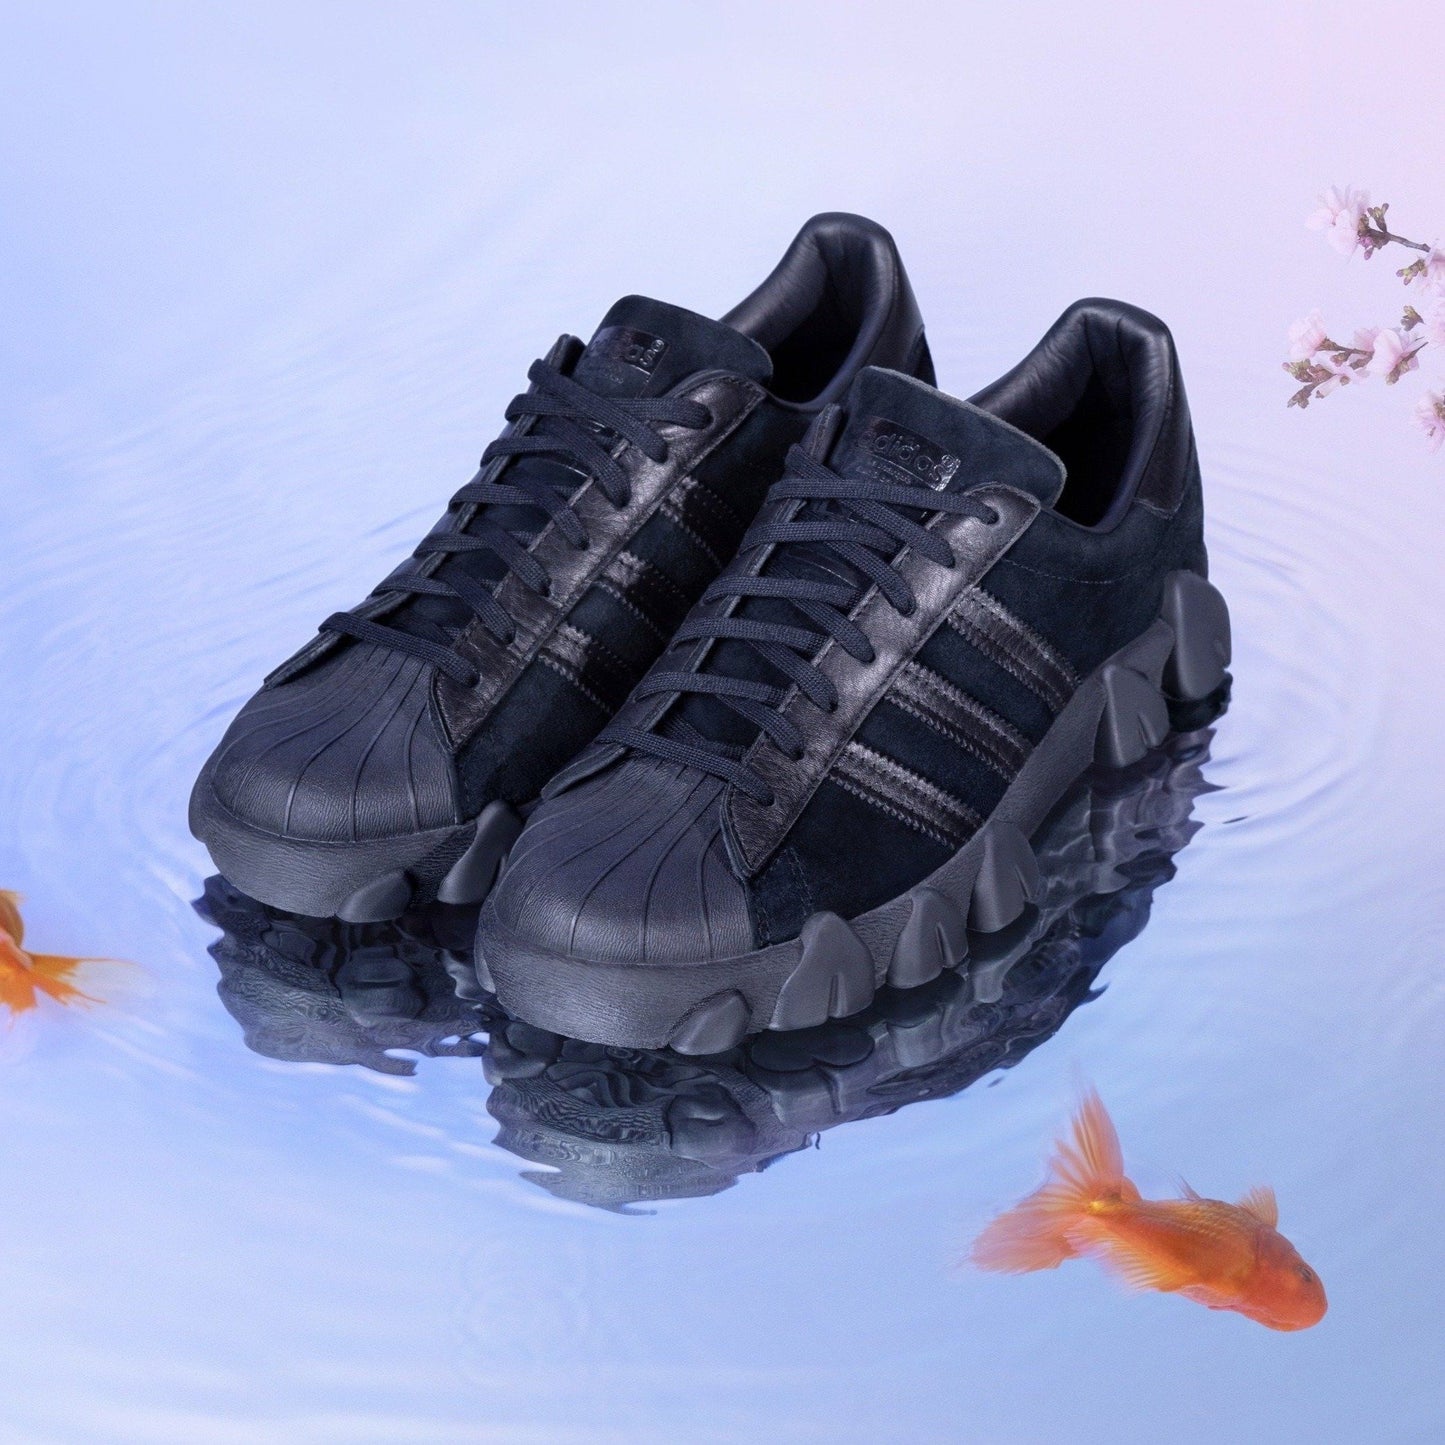 adidas x angel chen SUPERSTAR80S black sneakers editorial